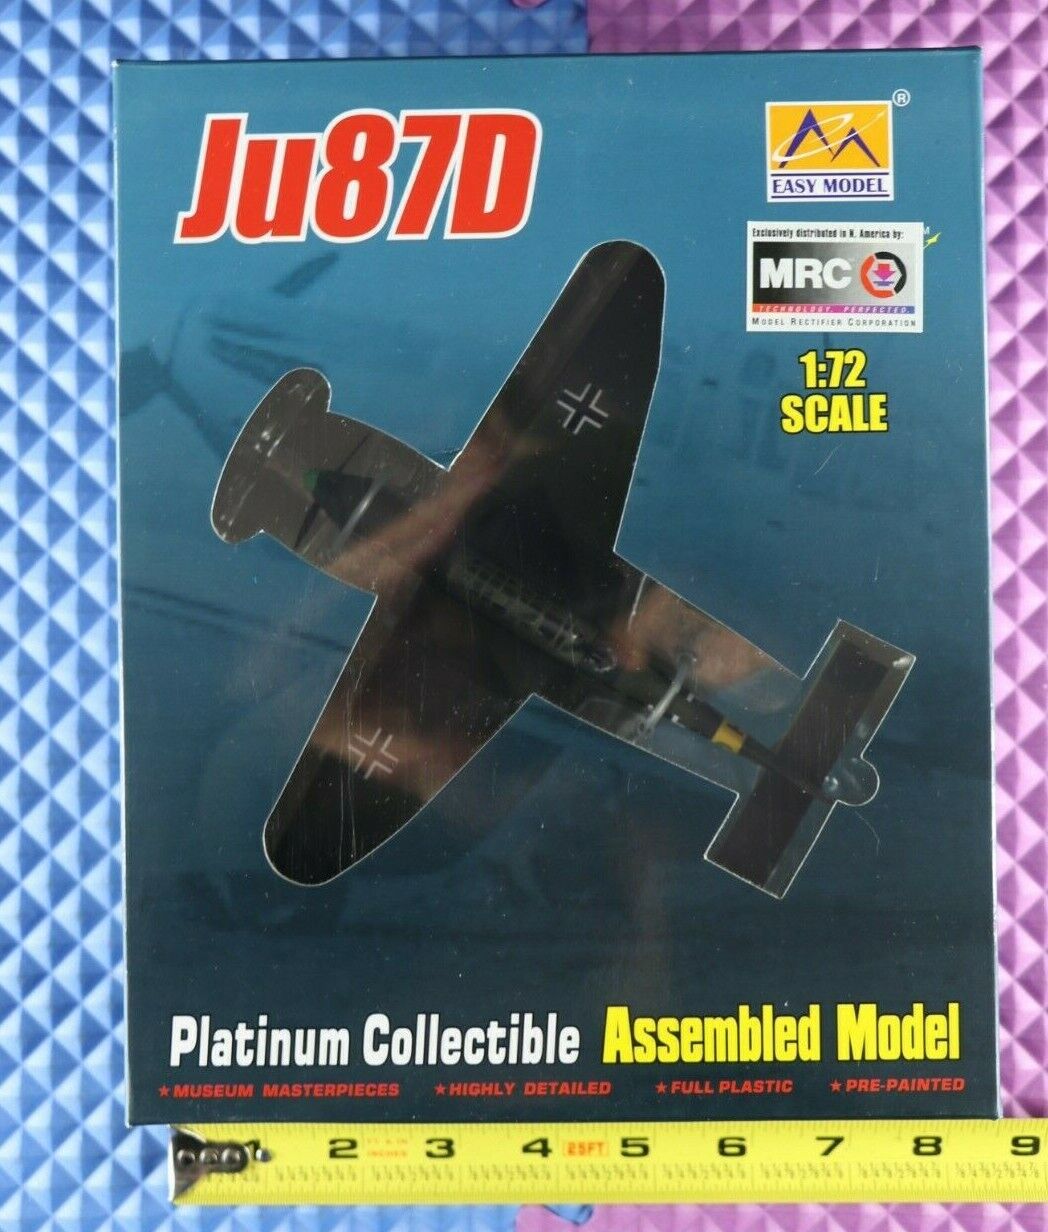 Easy Model 1/72 Scale Ju87D Platinum Collectible Assembled Aircraft Model 36385